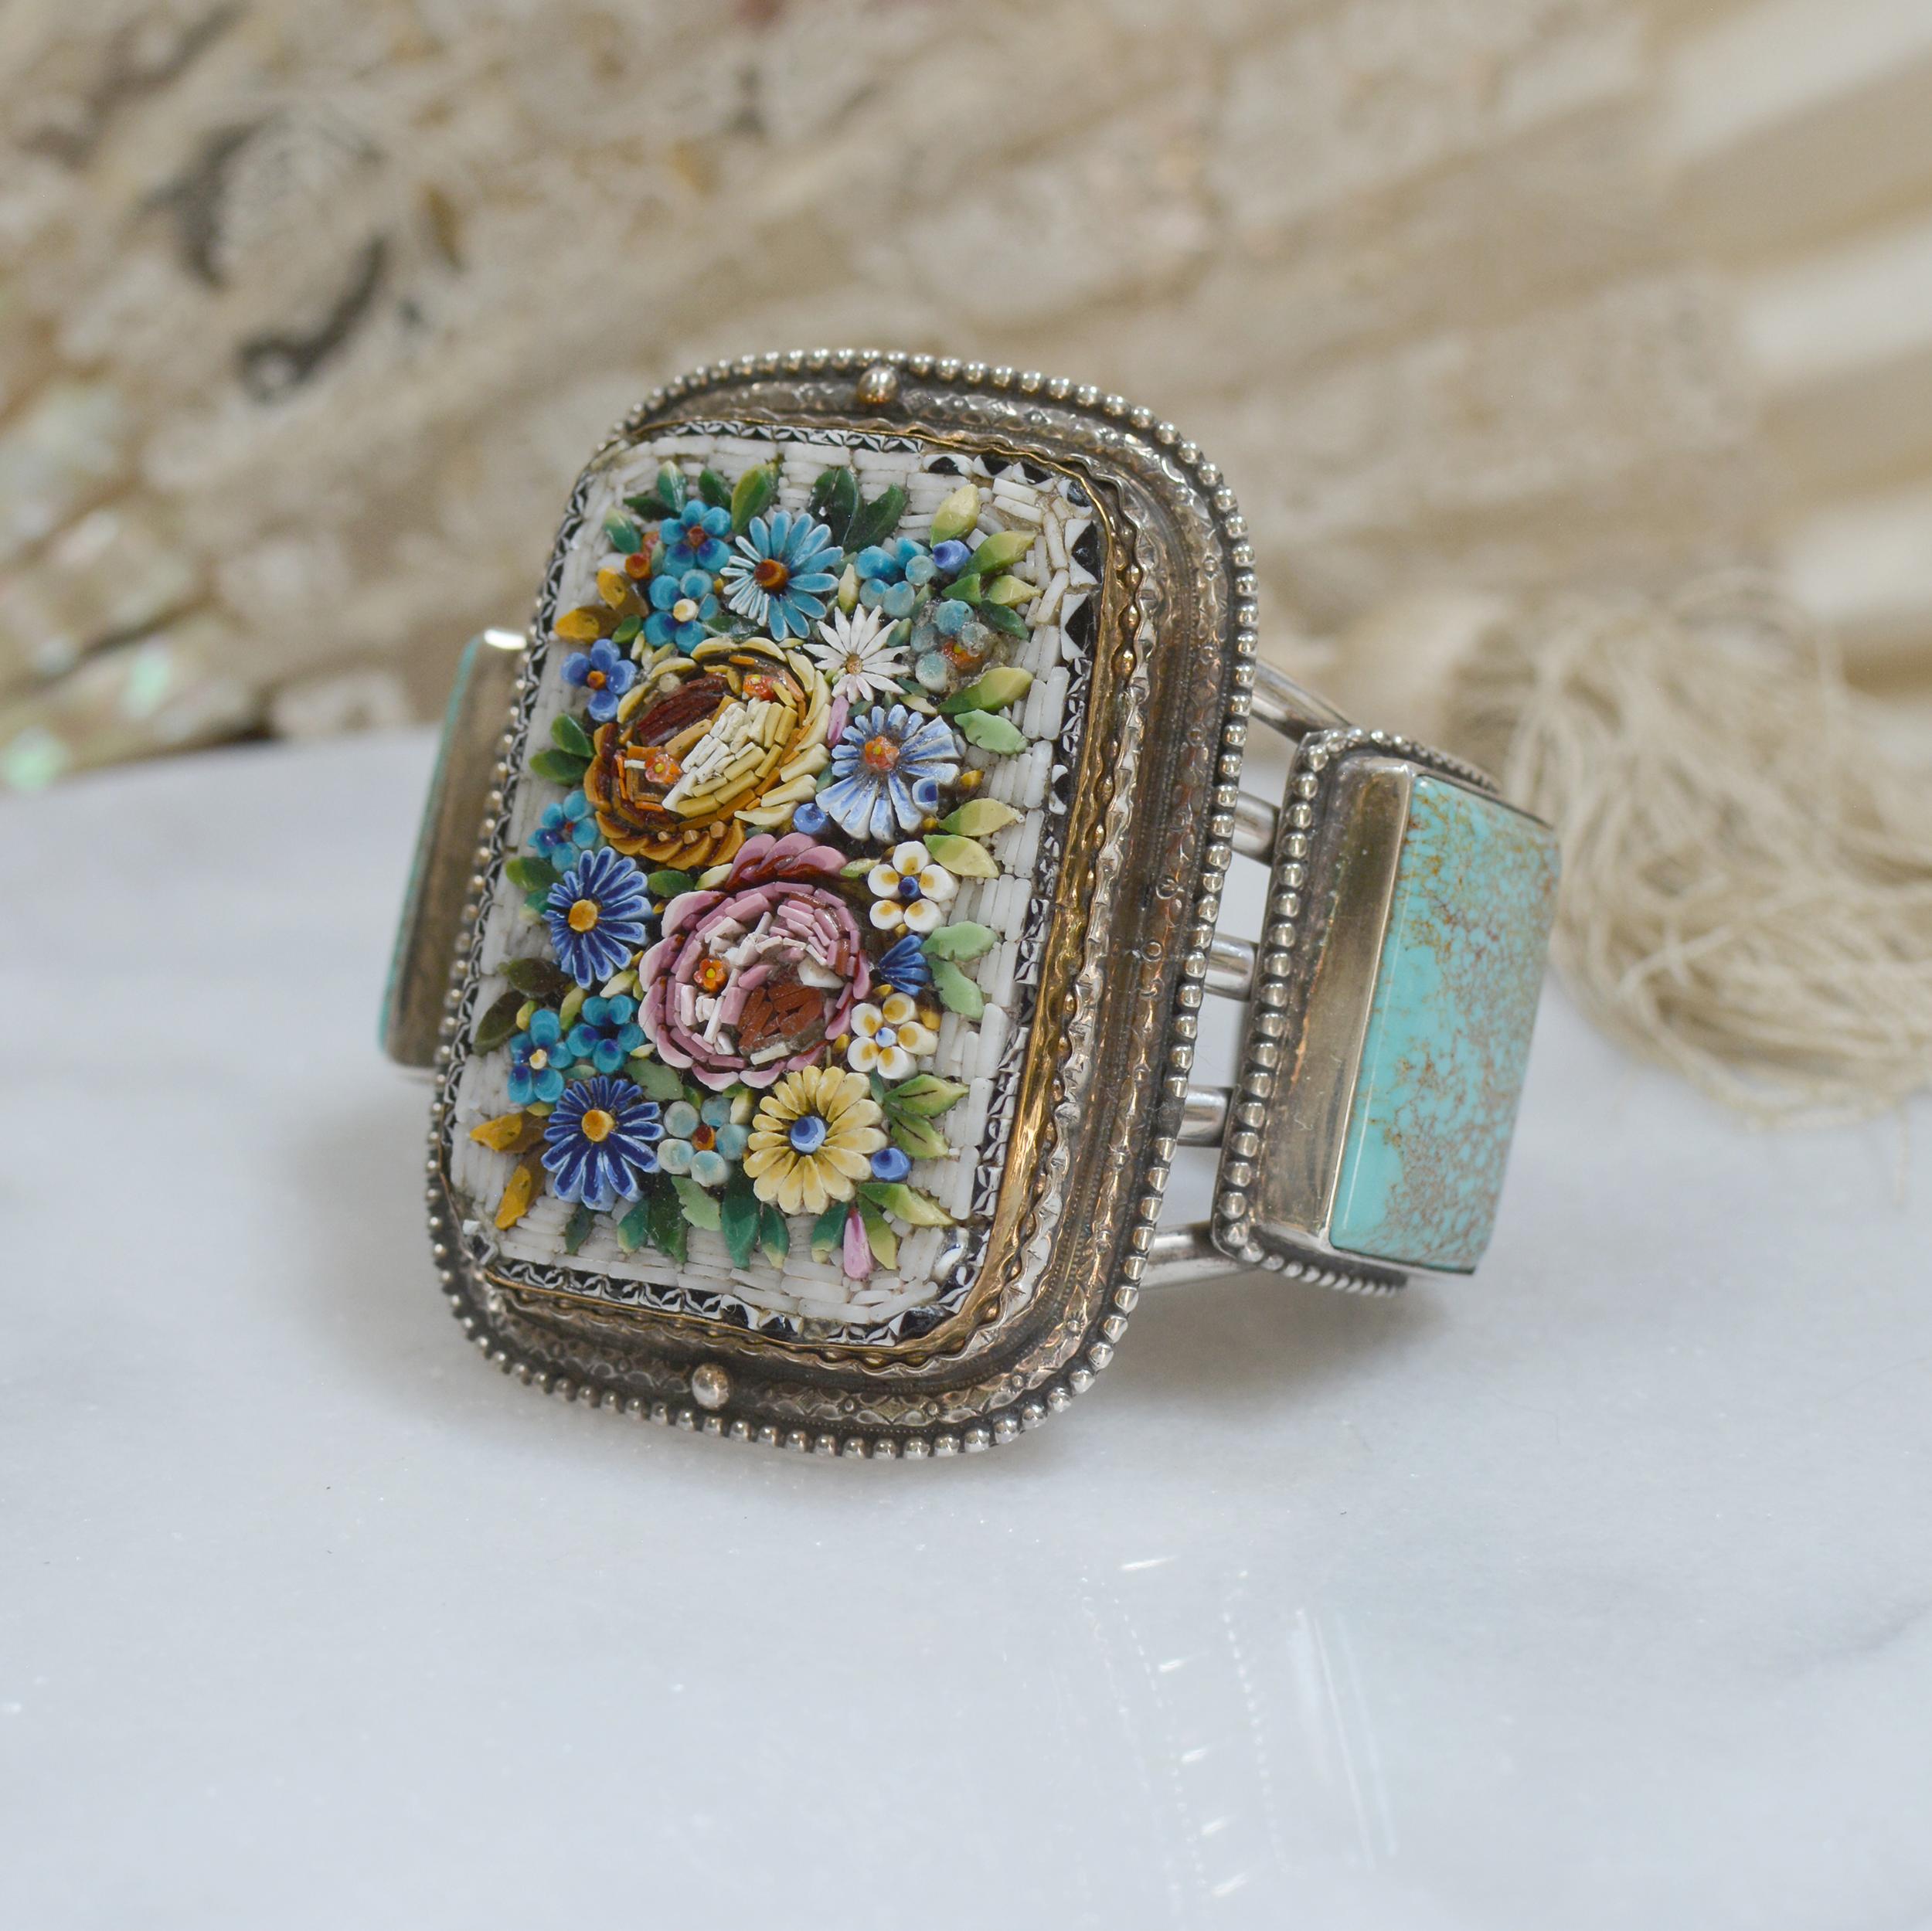 Baroque Jill Garber Floral Grand Tour Venetian Micro Mosaic and Turquoise Cuff Bracelet